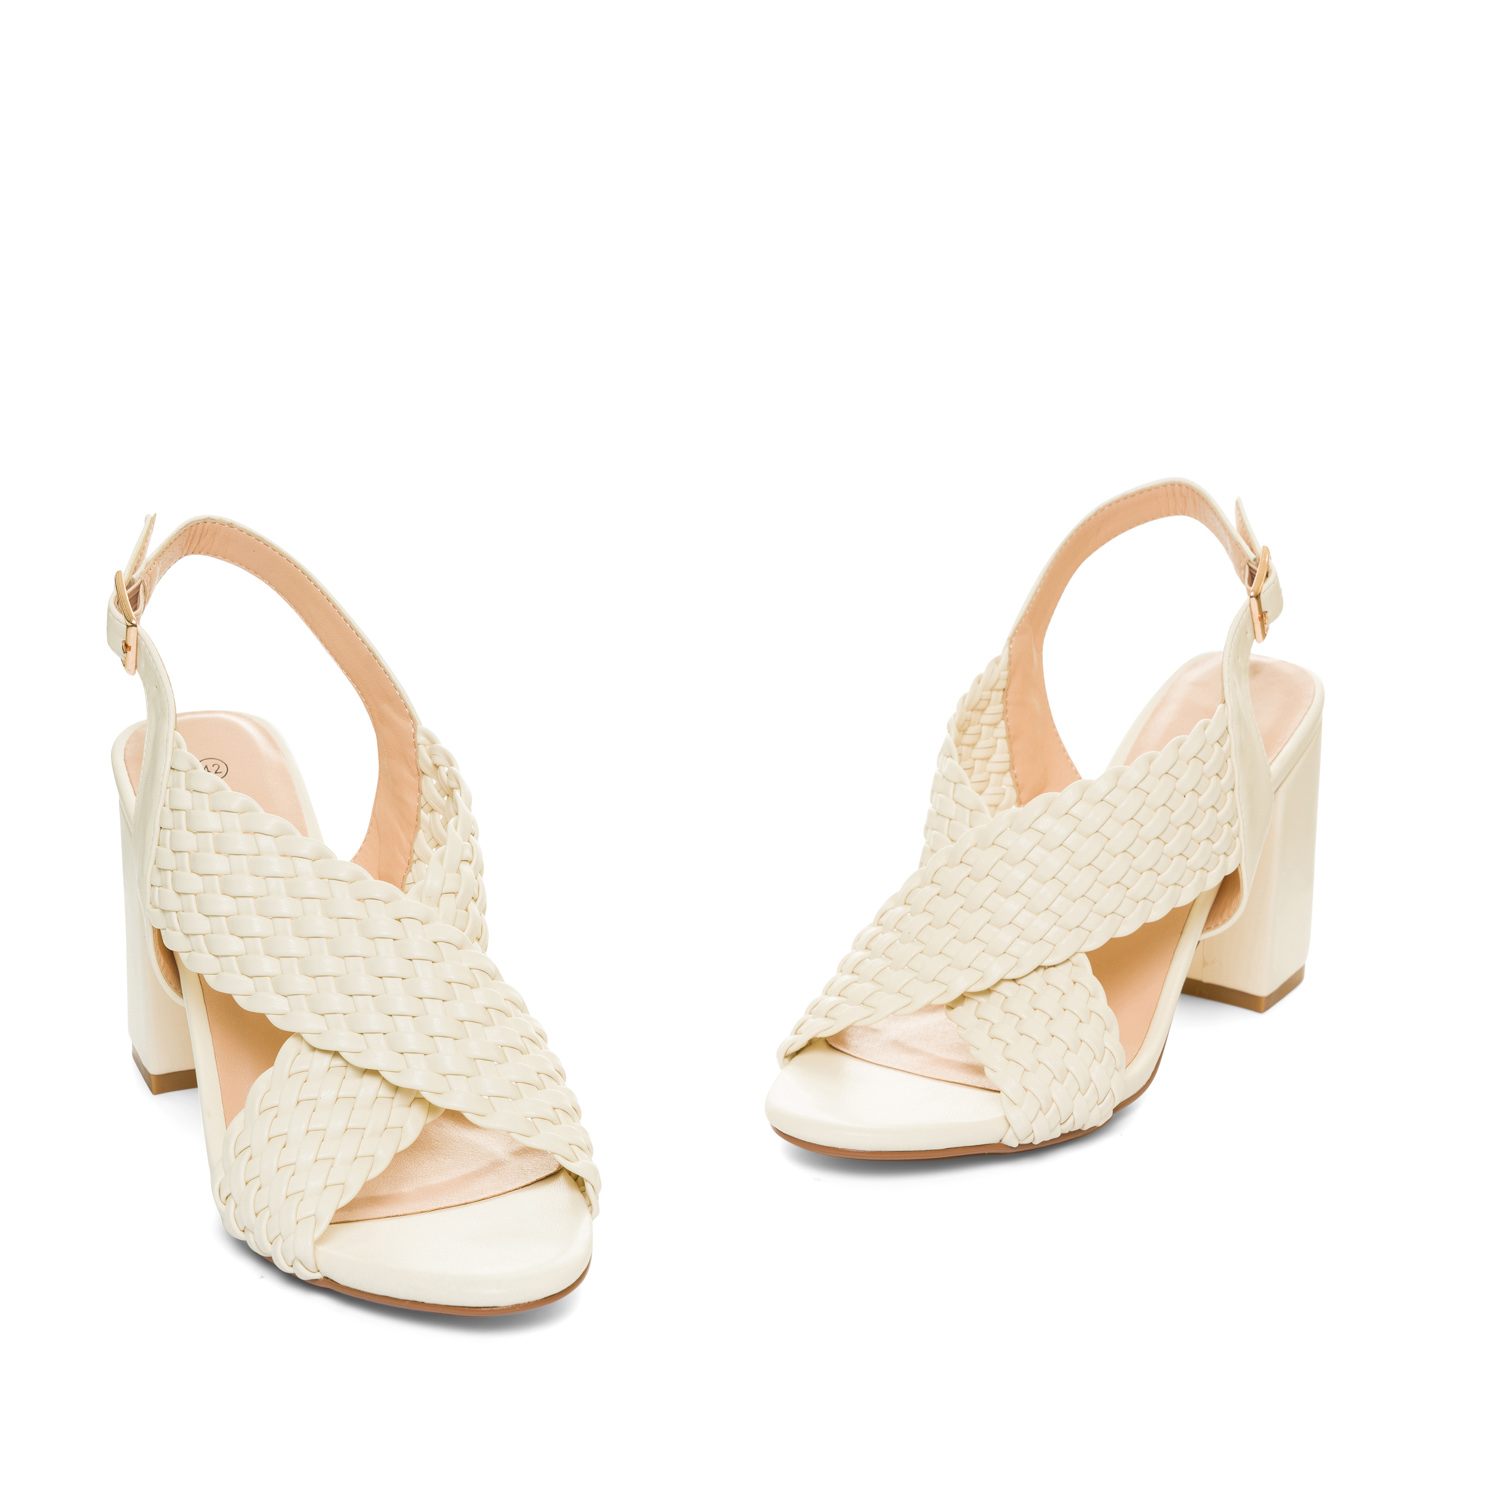 Braided white faux leather sandals 